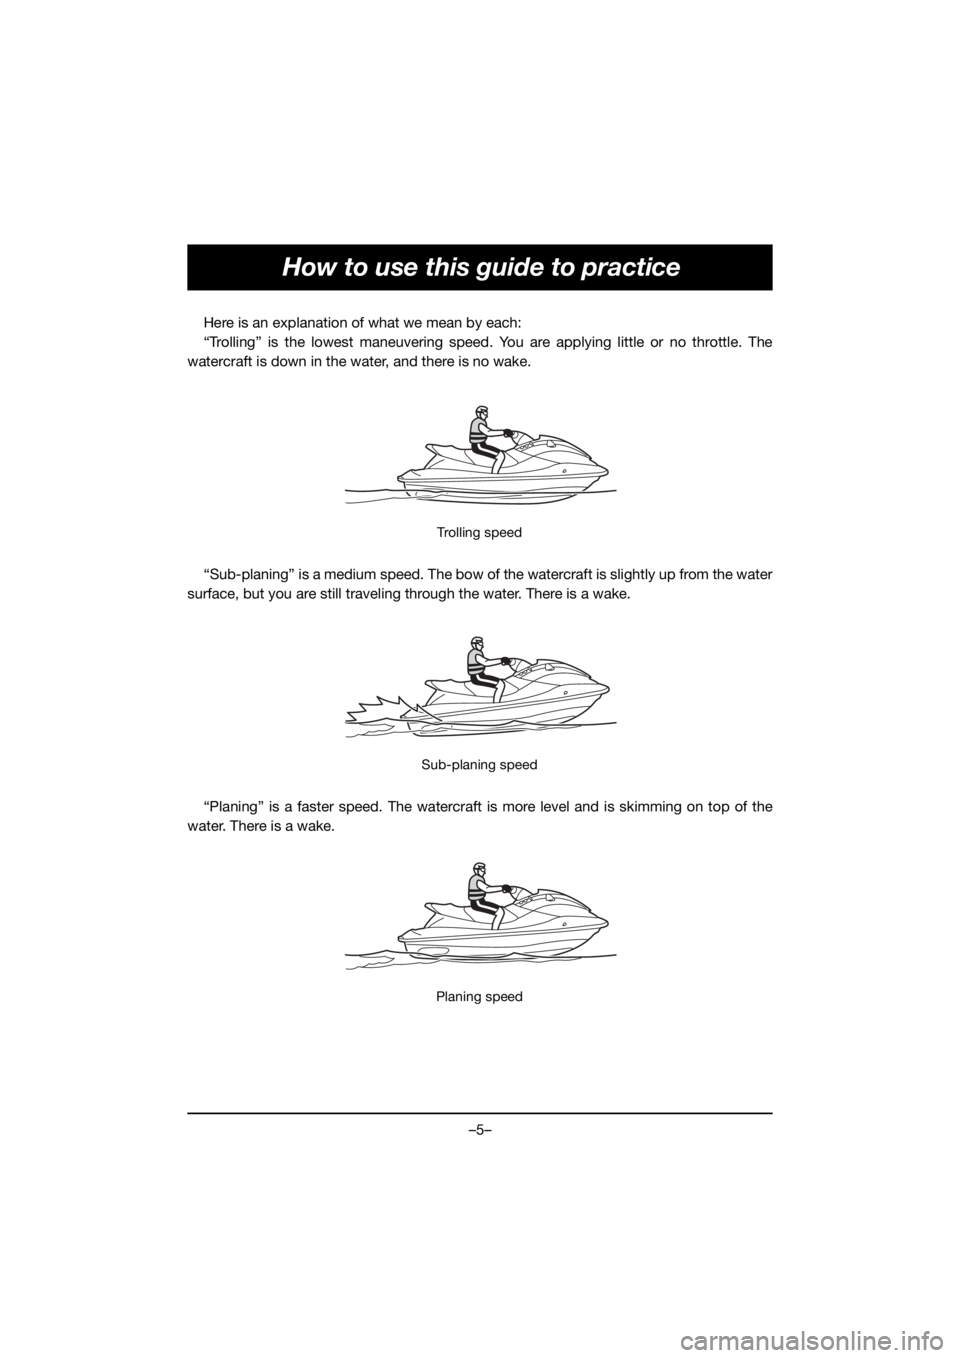 YAMAHA EX 2021  Bruksanvisningar (in Swedish) –5–
How to use this guide to practice
Here is an explanation of what we mean by each:
“Trolling” is the lowest maneuvering speed. You are applying little or no throttle. The
watercraft is down